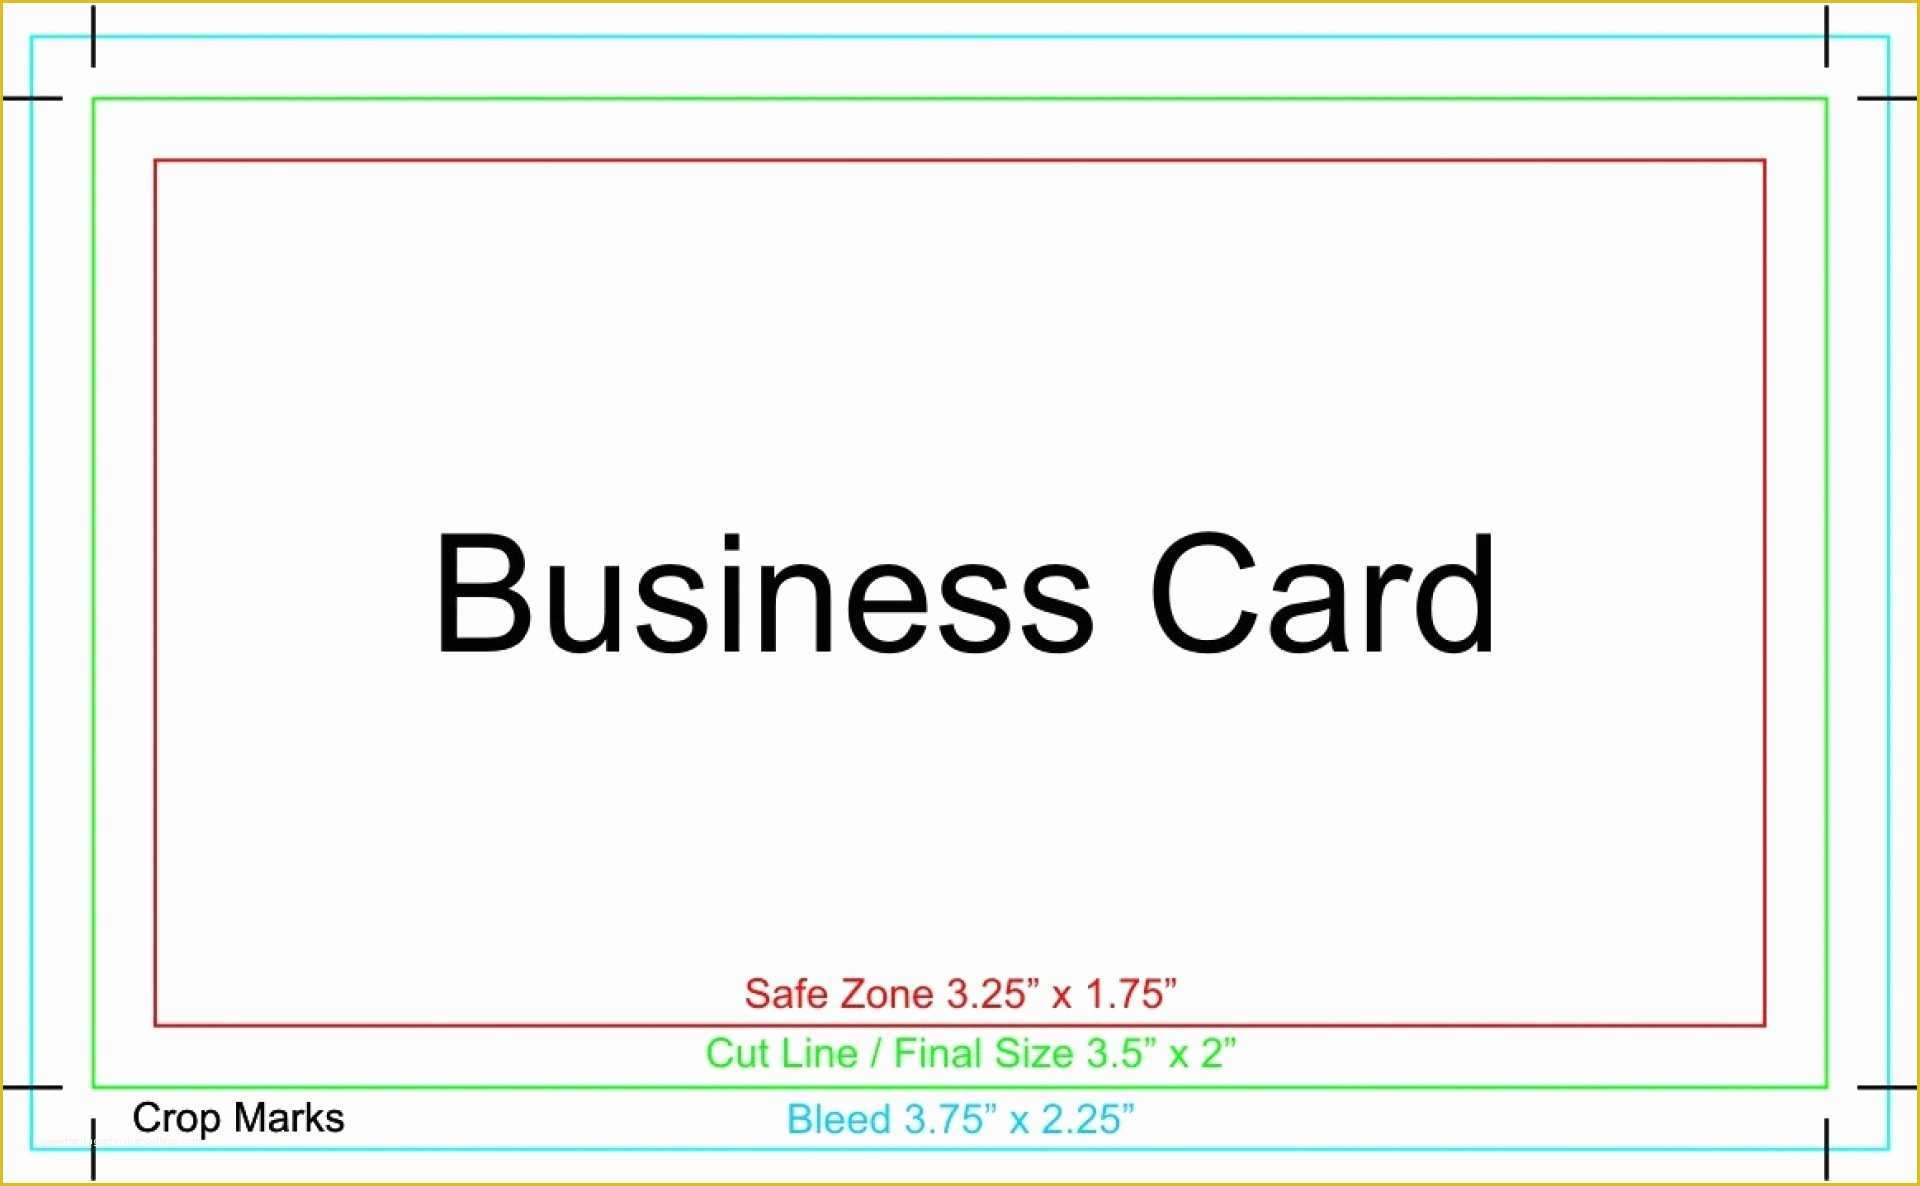 Business Card Template Word Free Download Of 022 Microsoft Word Business Card Template with Crop Marks